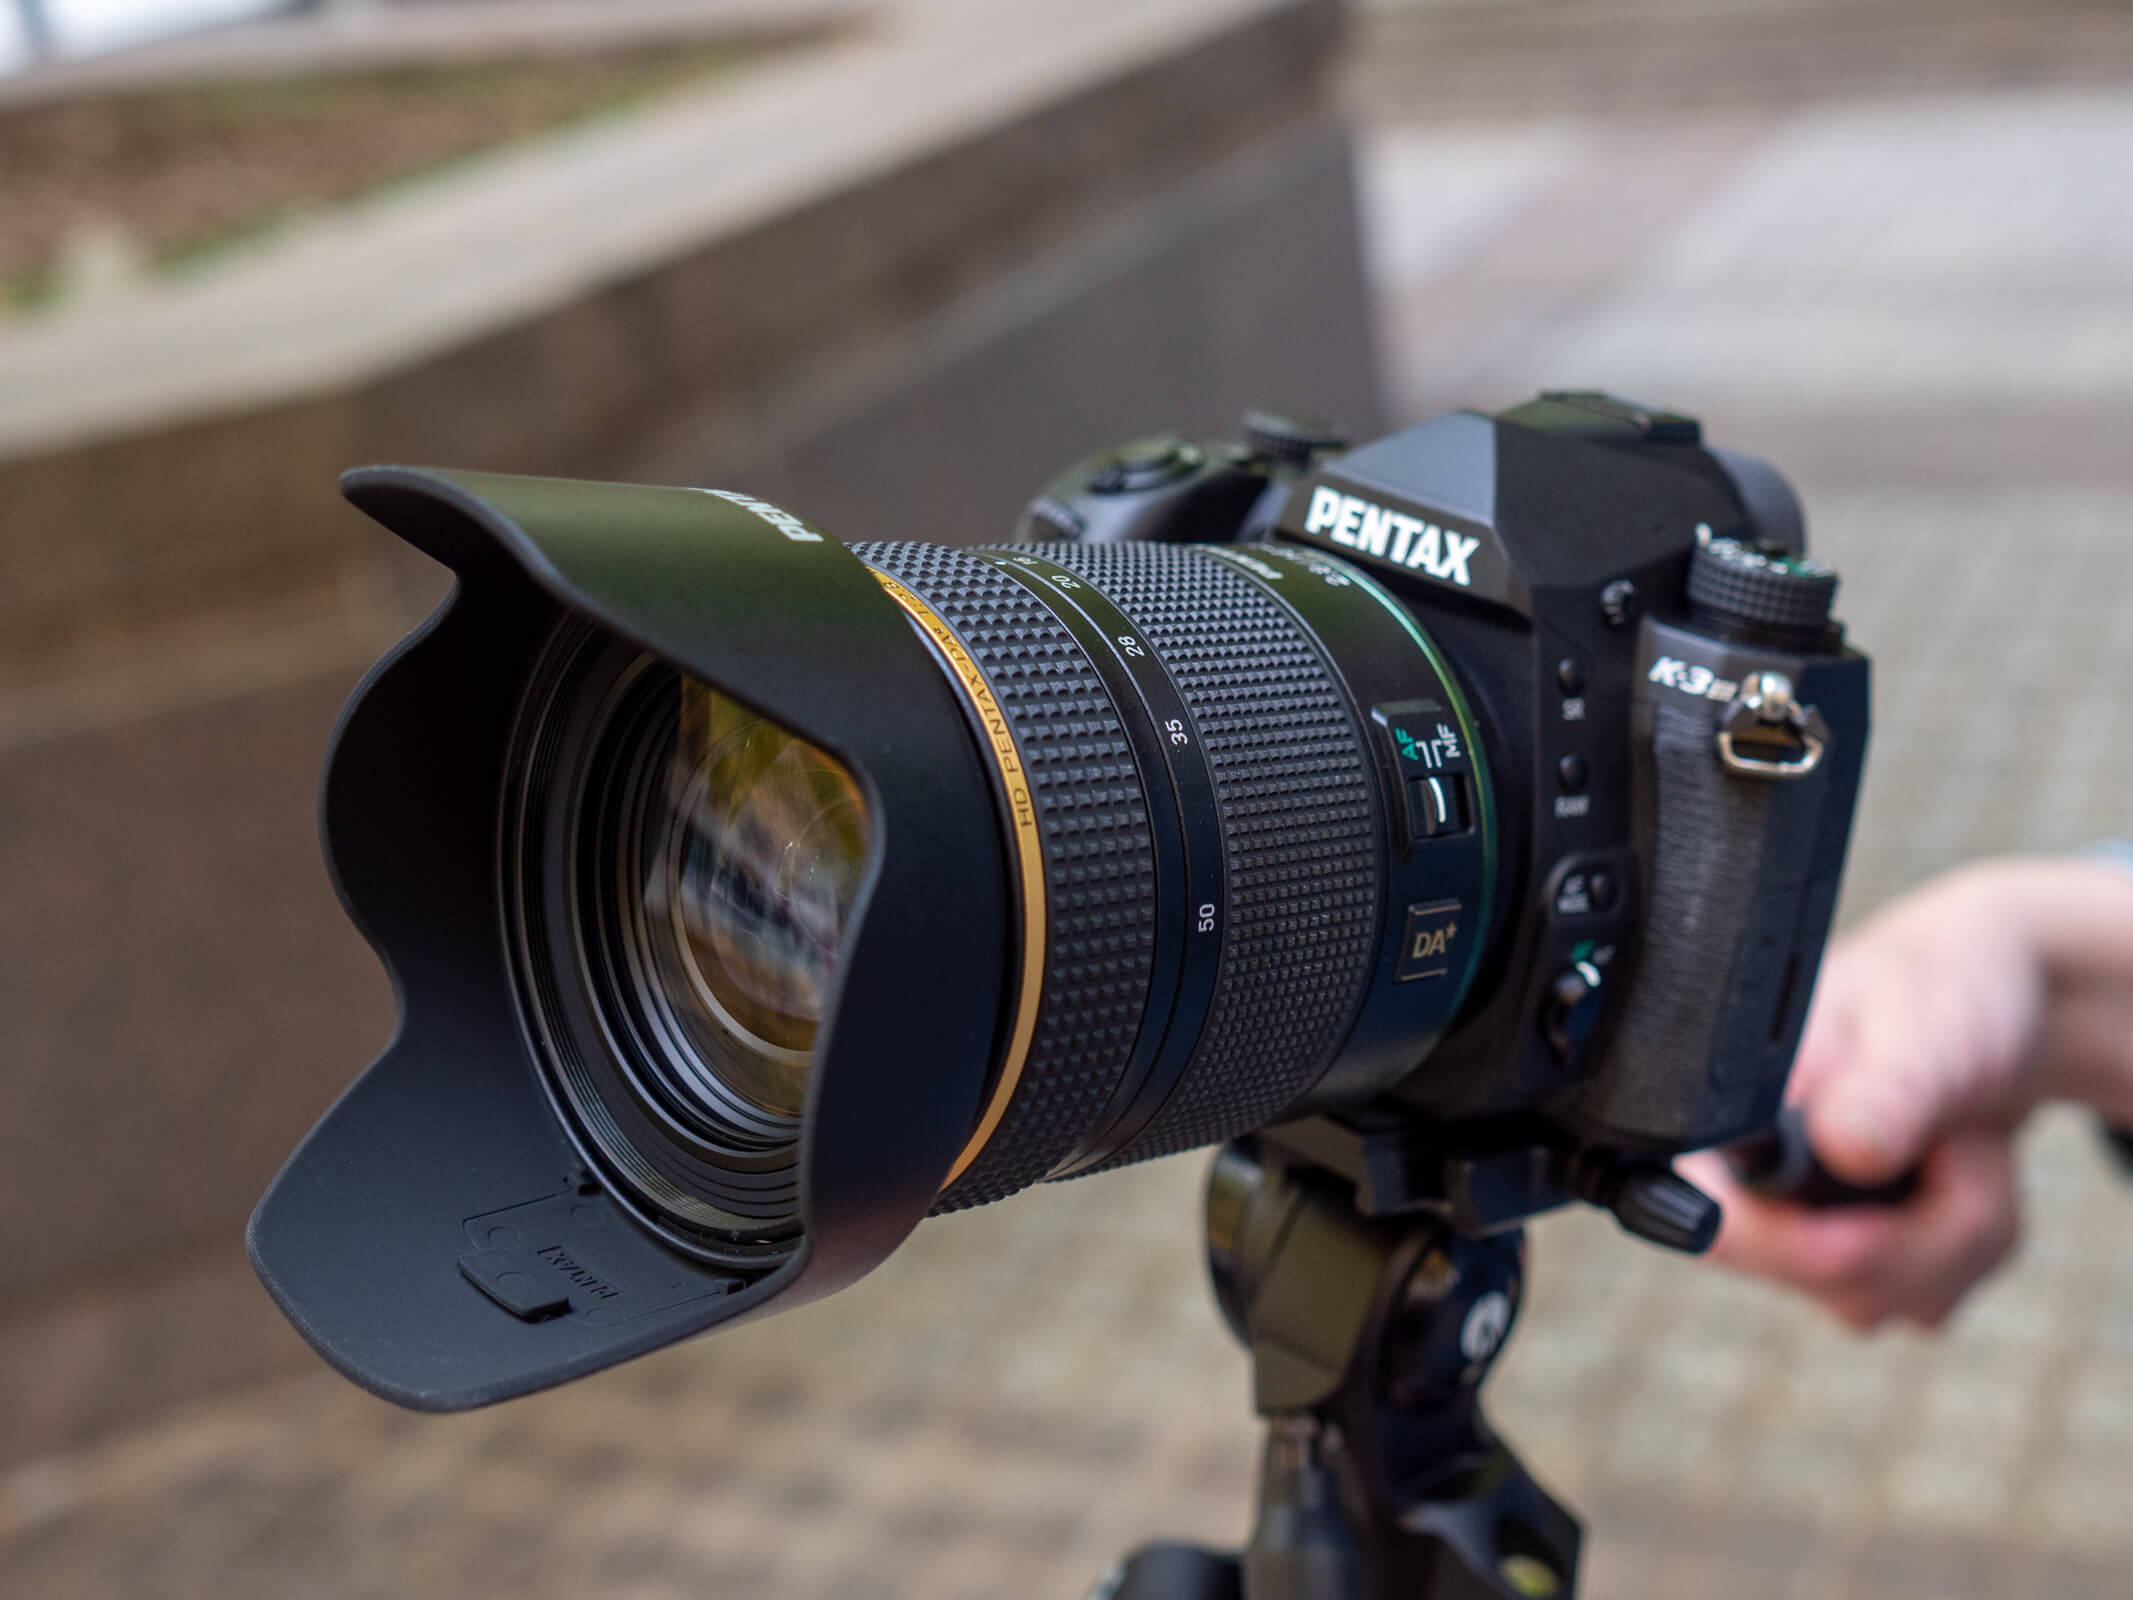 Pentax DA* 16-50mm f/2.8 ED PLM AW review: It lives up to the star